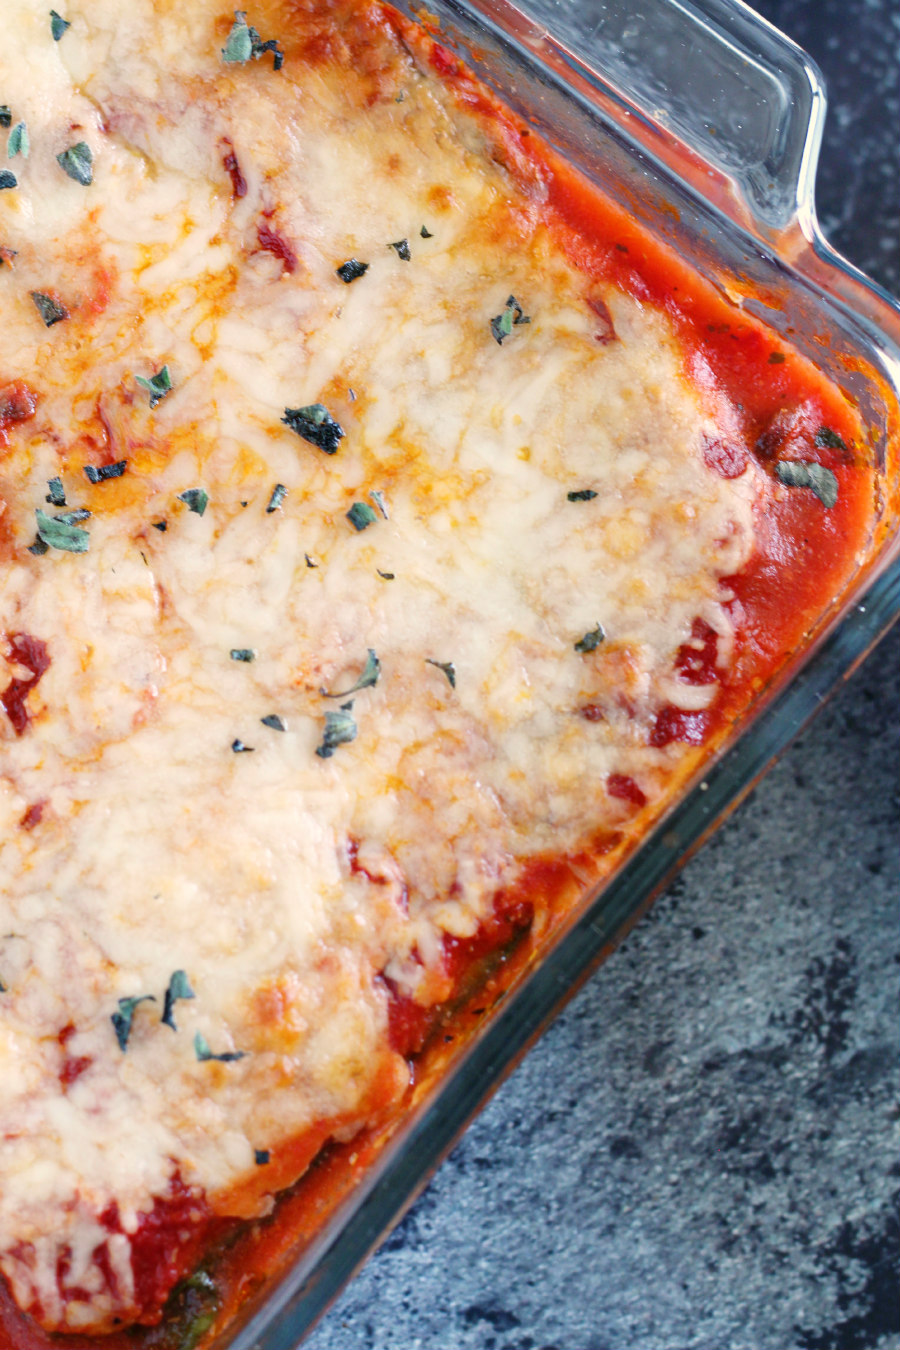 This Low-Carb Zucchini Lasagna is healthy comfort food at its finest. This Keto Diet approved dish uses zoodles to create a vegetarian lasagna that's a healthier classic to a high-carb pasta favorite.